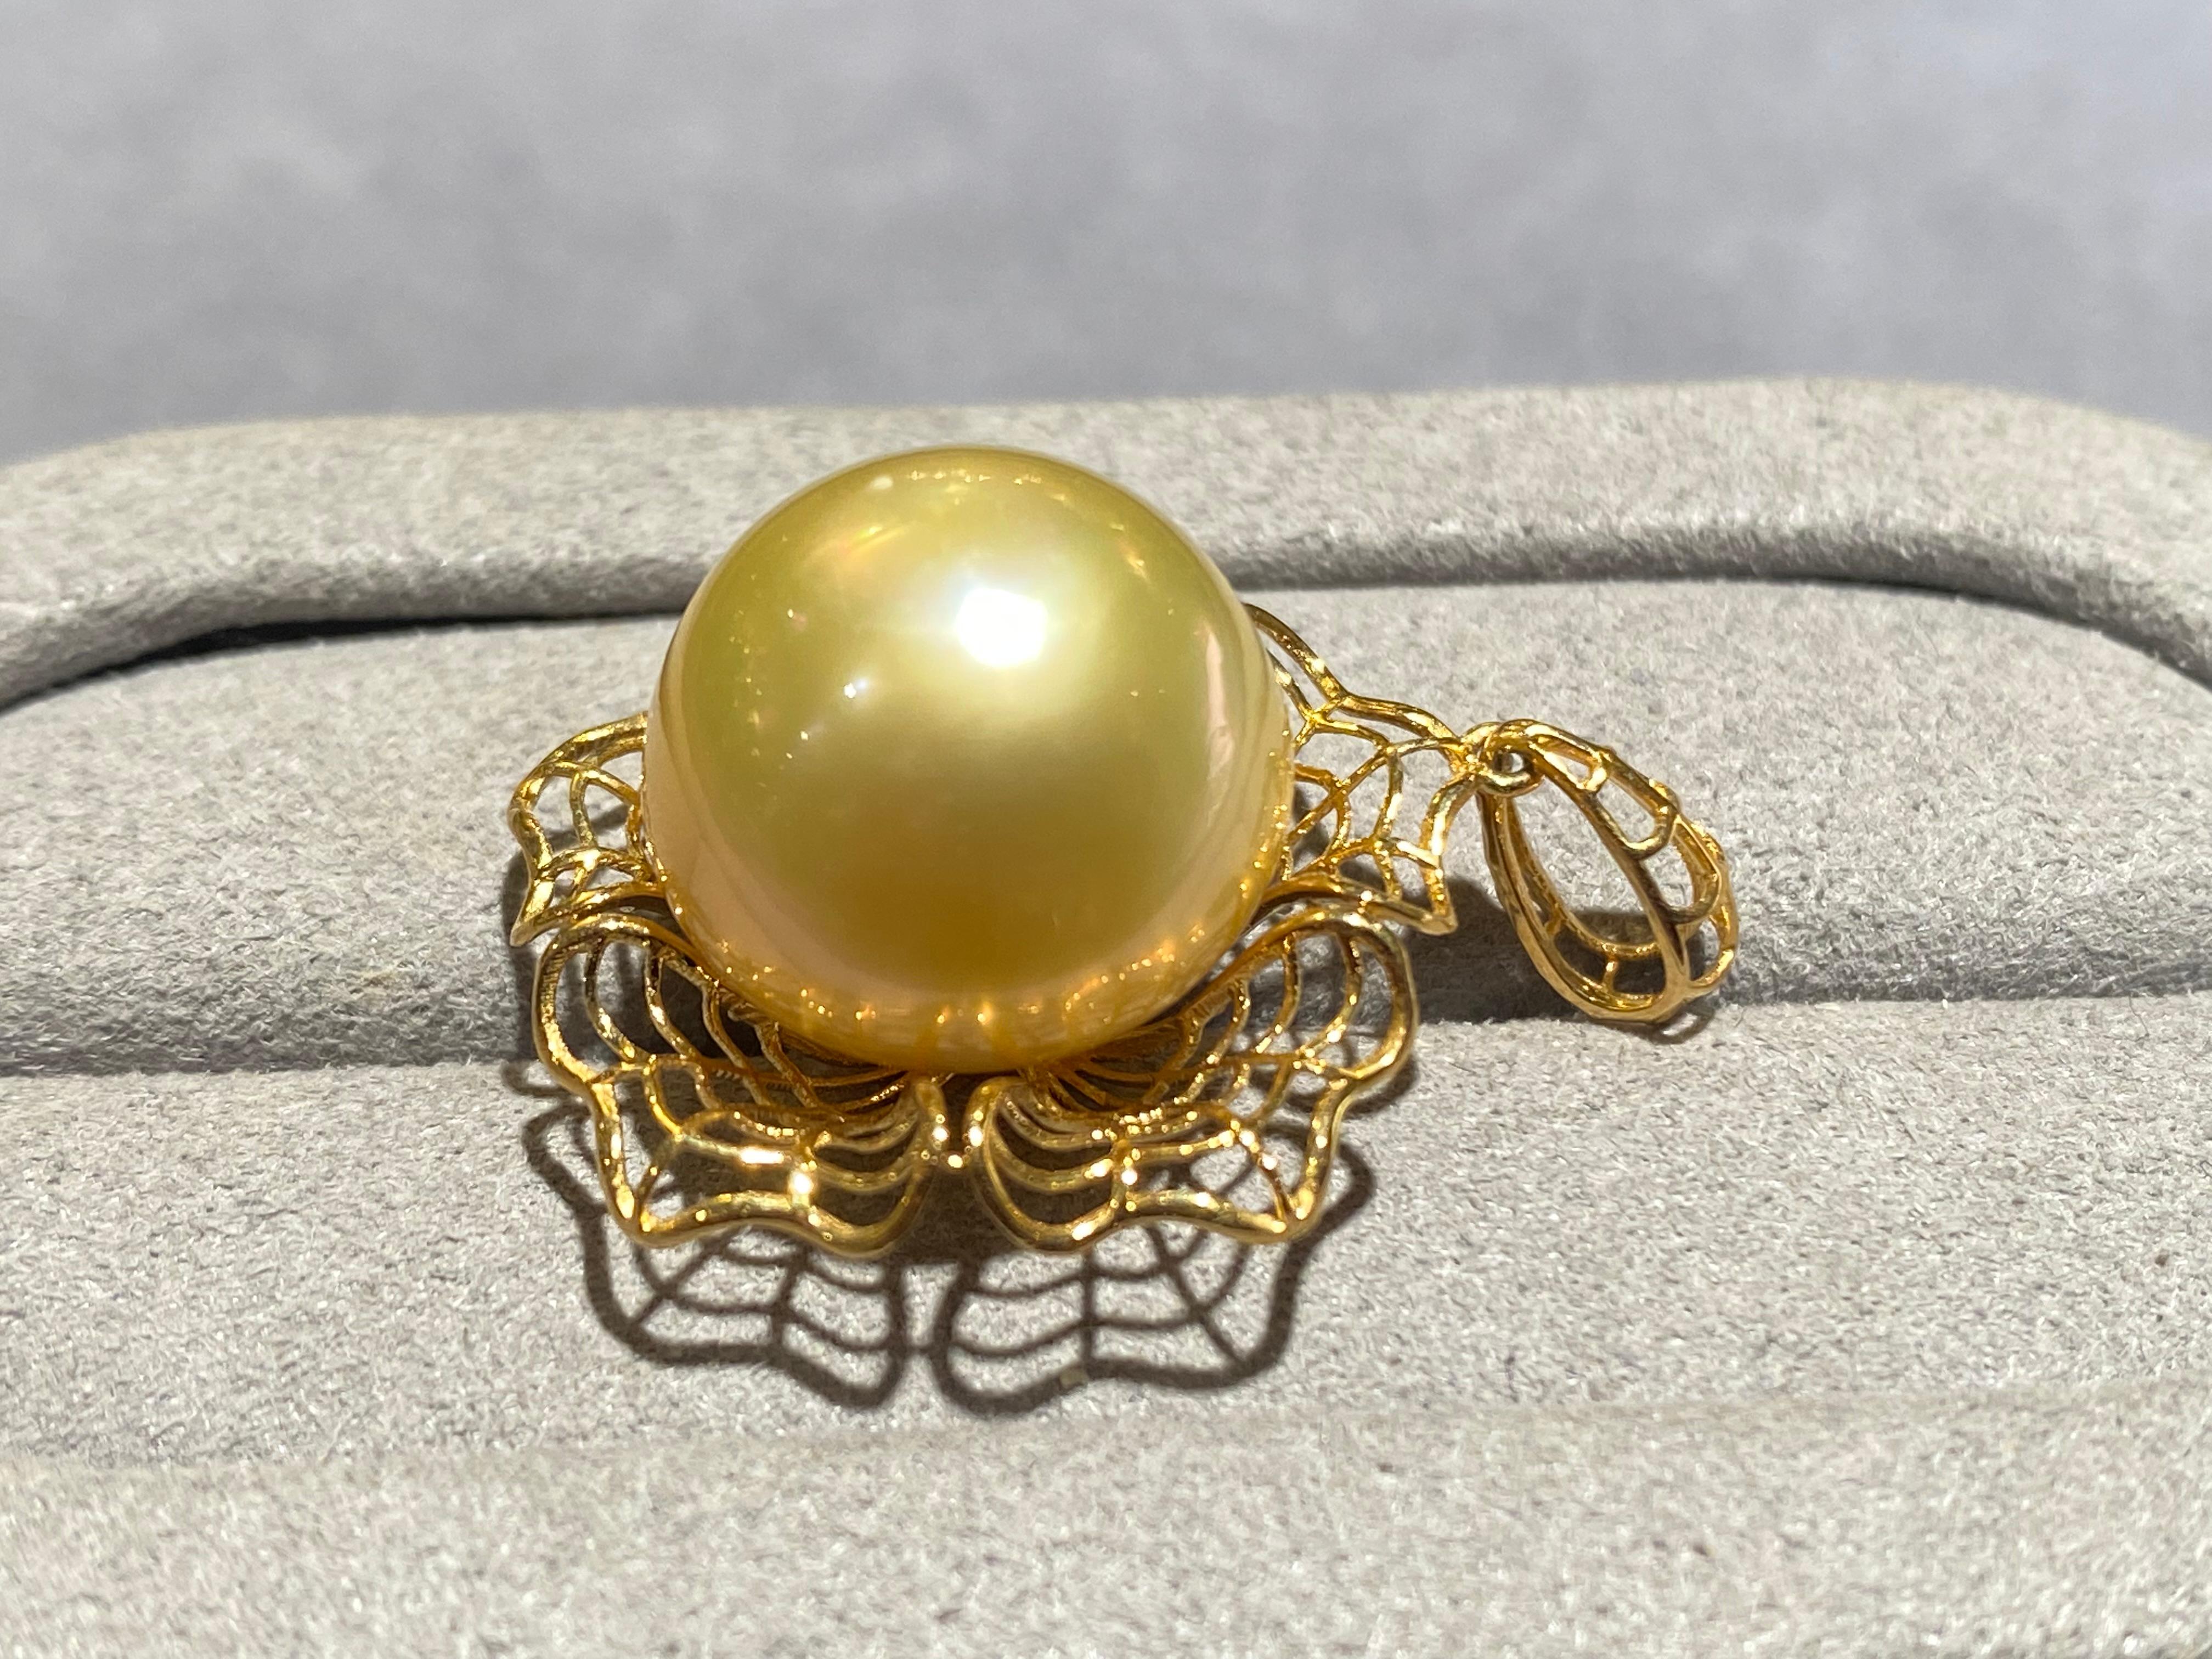 A 14.7 mm button champagne colour south sea pearl pendant in 18k yellow gold. This pendant is a flower design with the pearl set in the middle of the pendant. The pendant is in a mesh form and the bale matches this form as well. It is a very simple